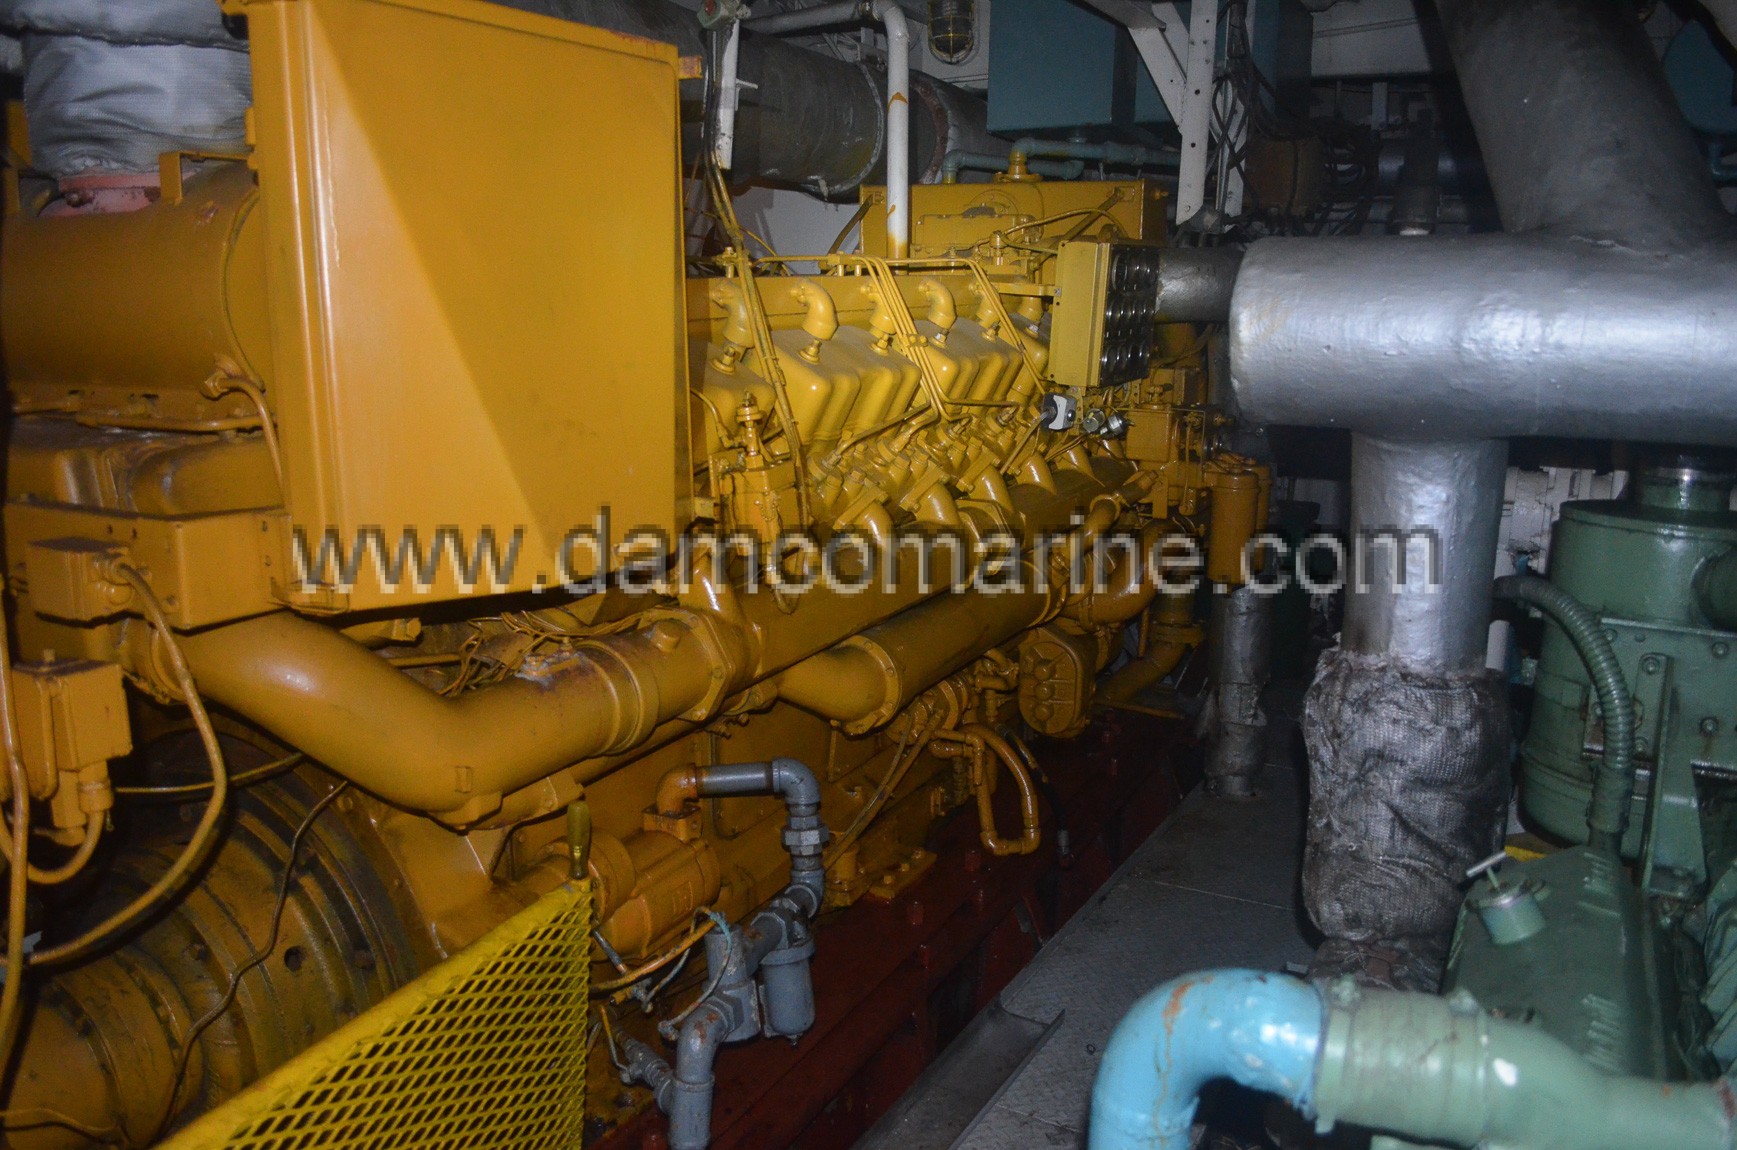 SB 331 Offshore Supply Vessel (REDUCED PRICE) Damco Marine Management